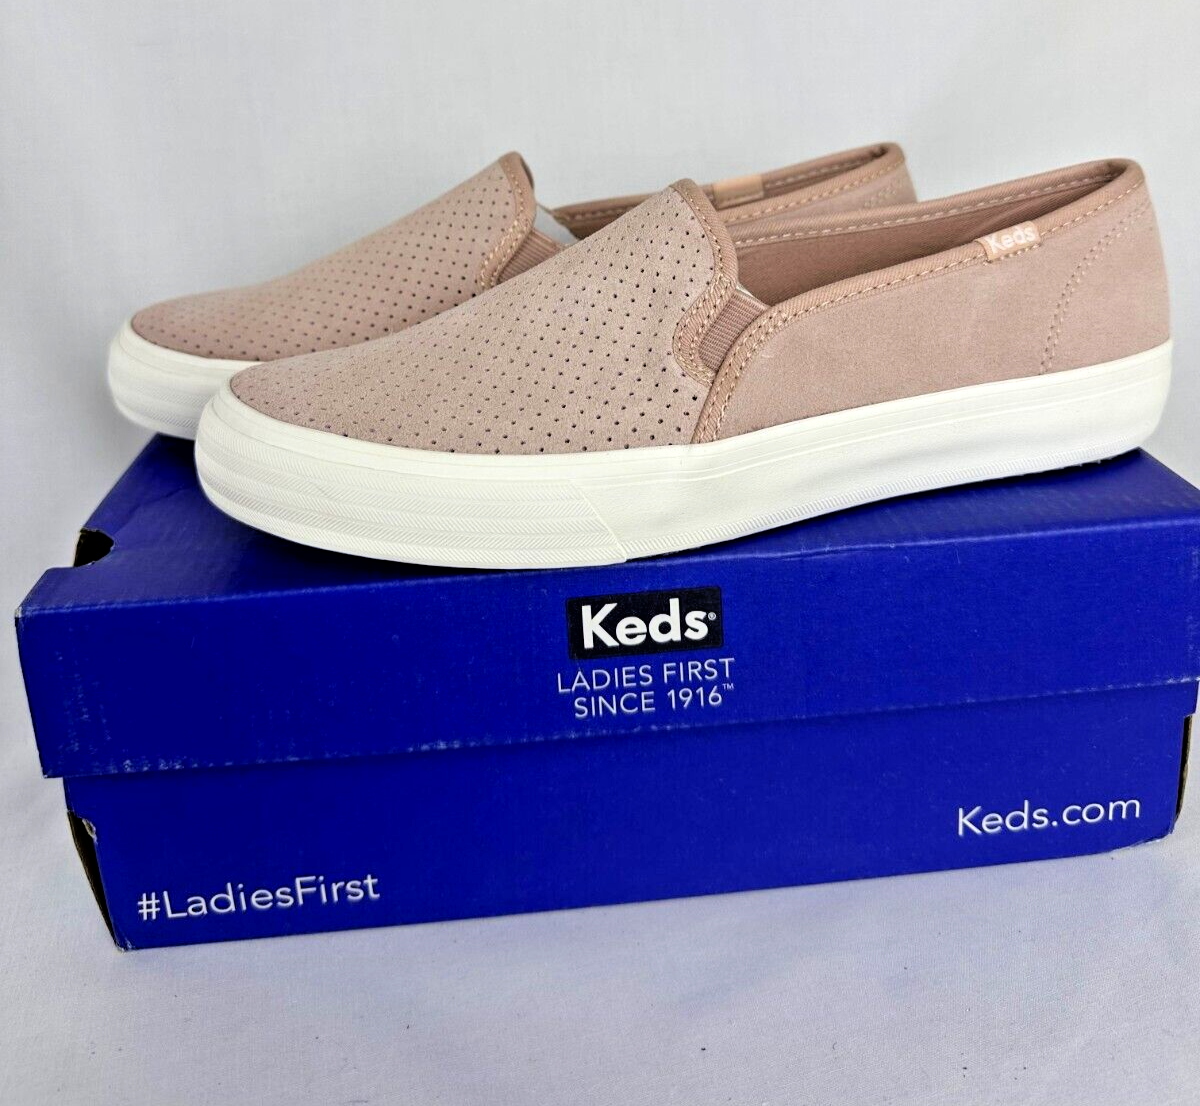 Keds Women 8.5 Double Decker Perf Suede Sneakers Pink Mauve Slip On Shoe WH61753